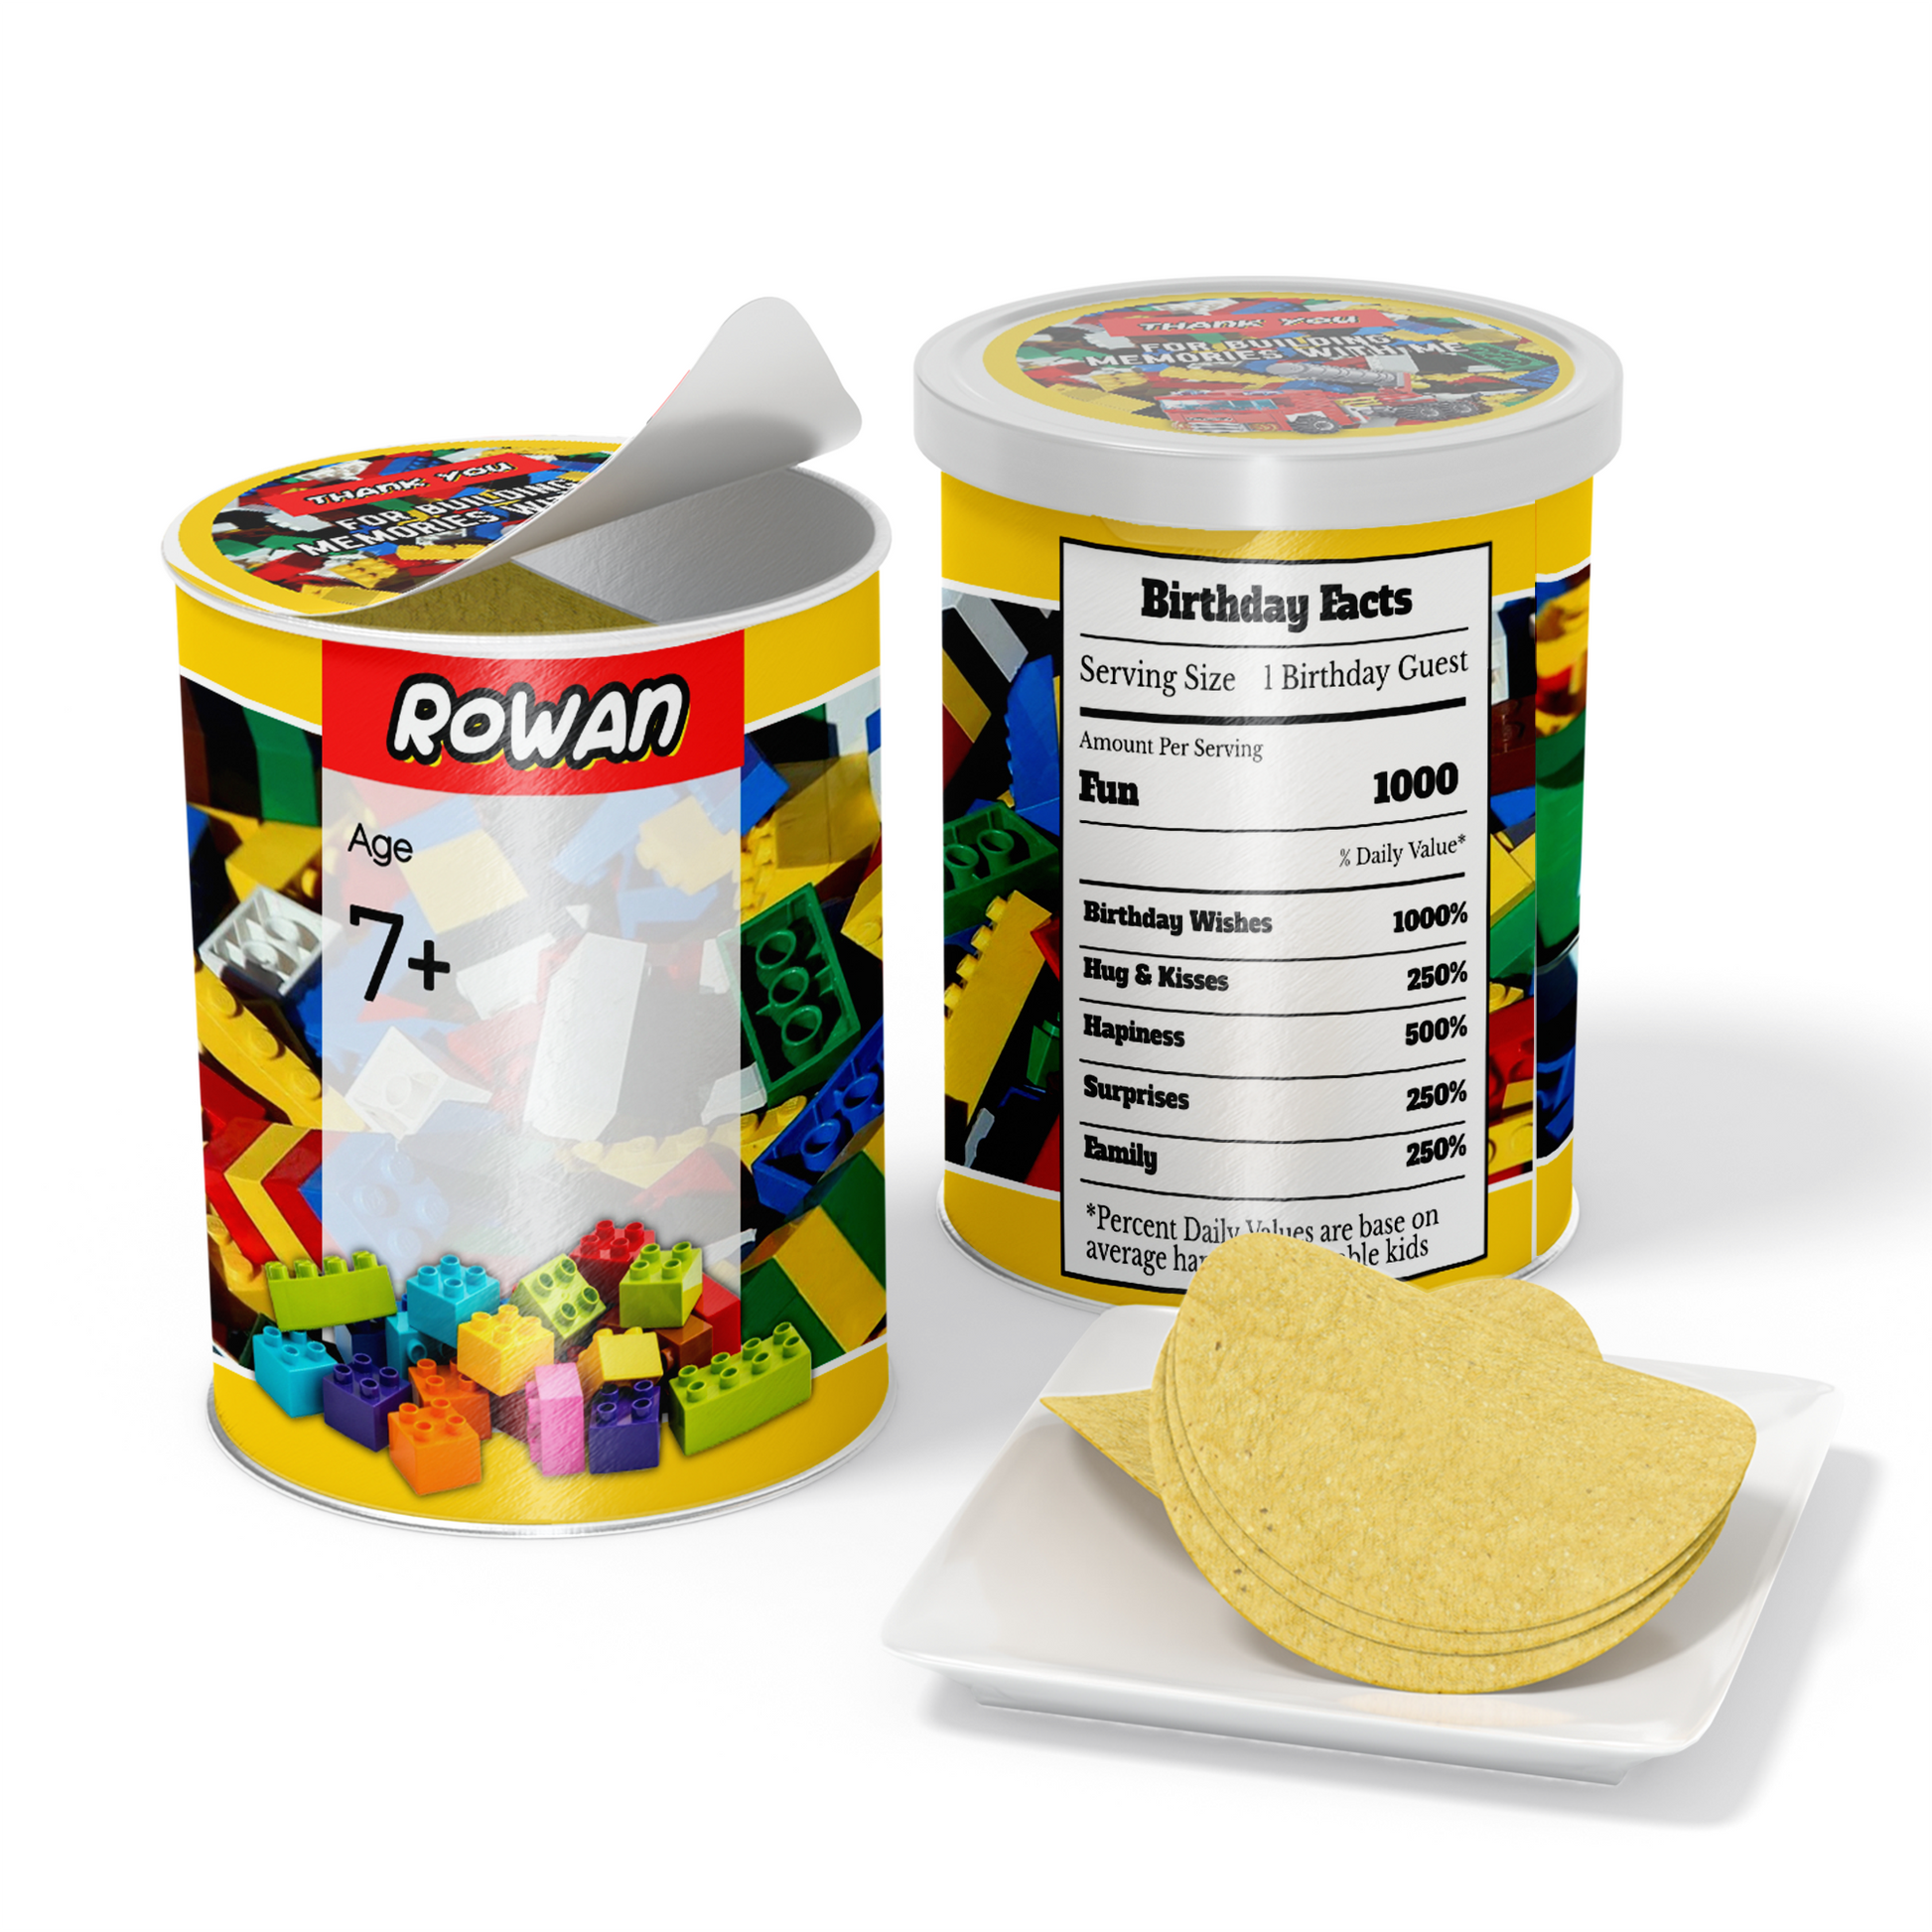 Small Pringles 1.37oz can label with a Lego, Building Blocks theme